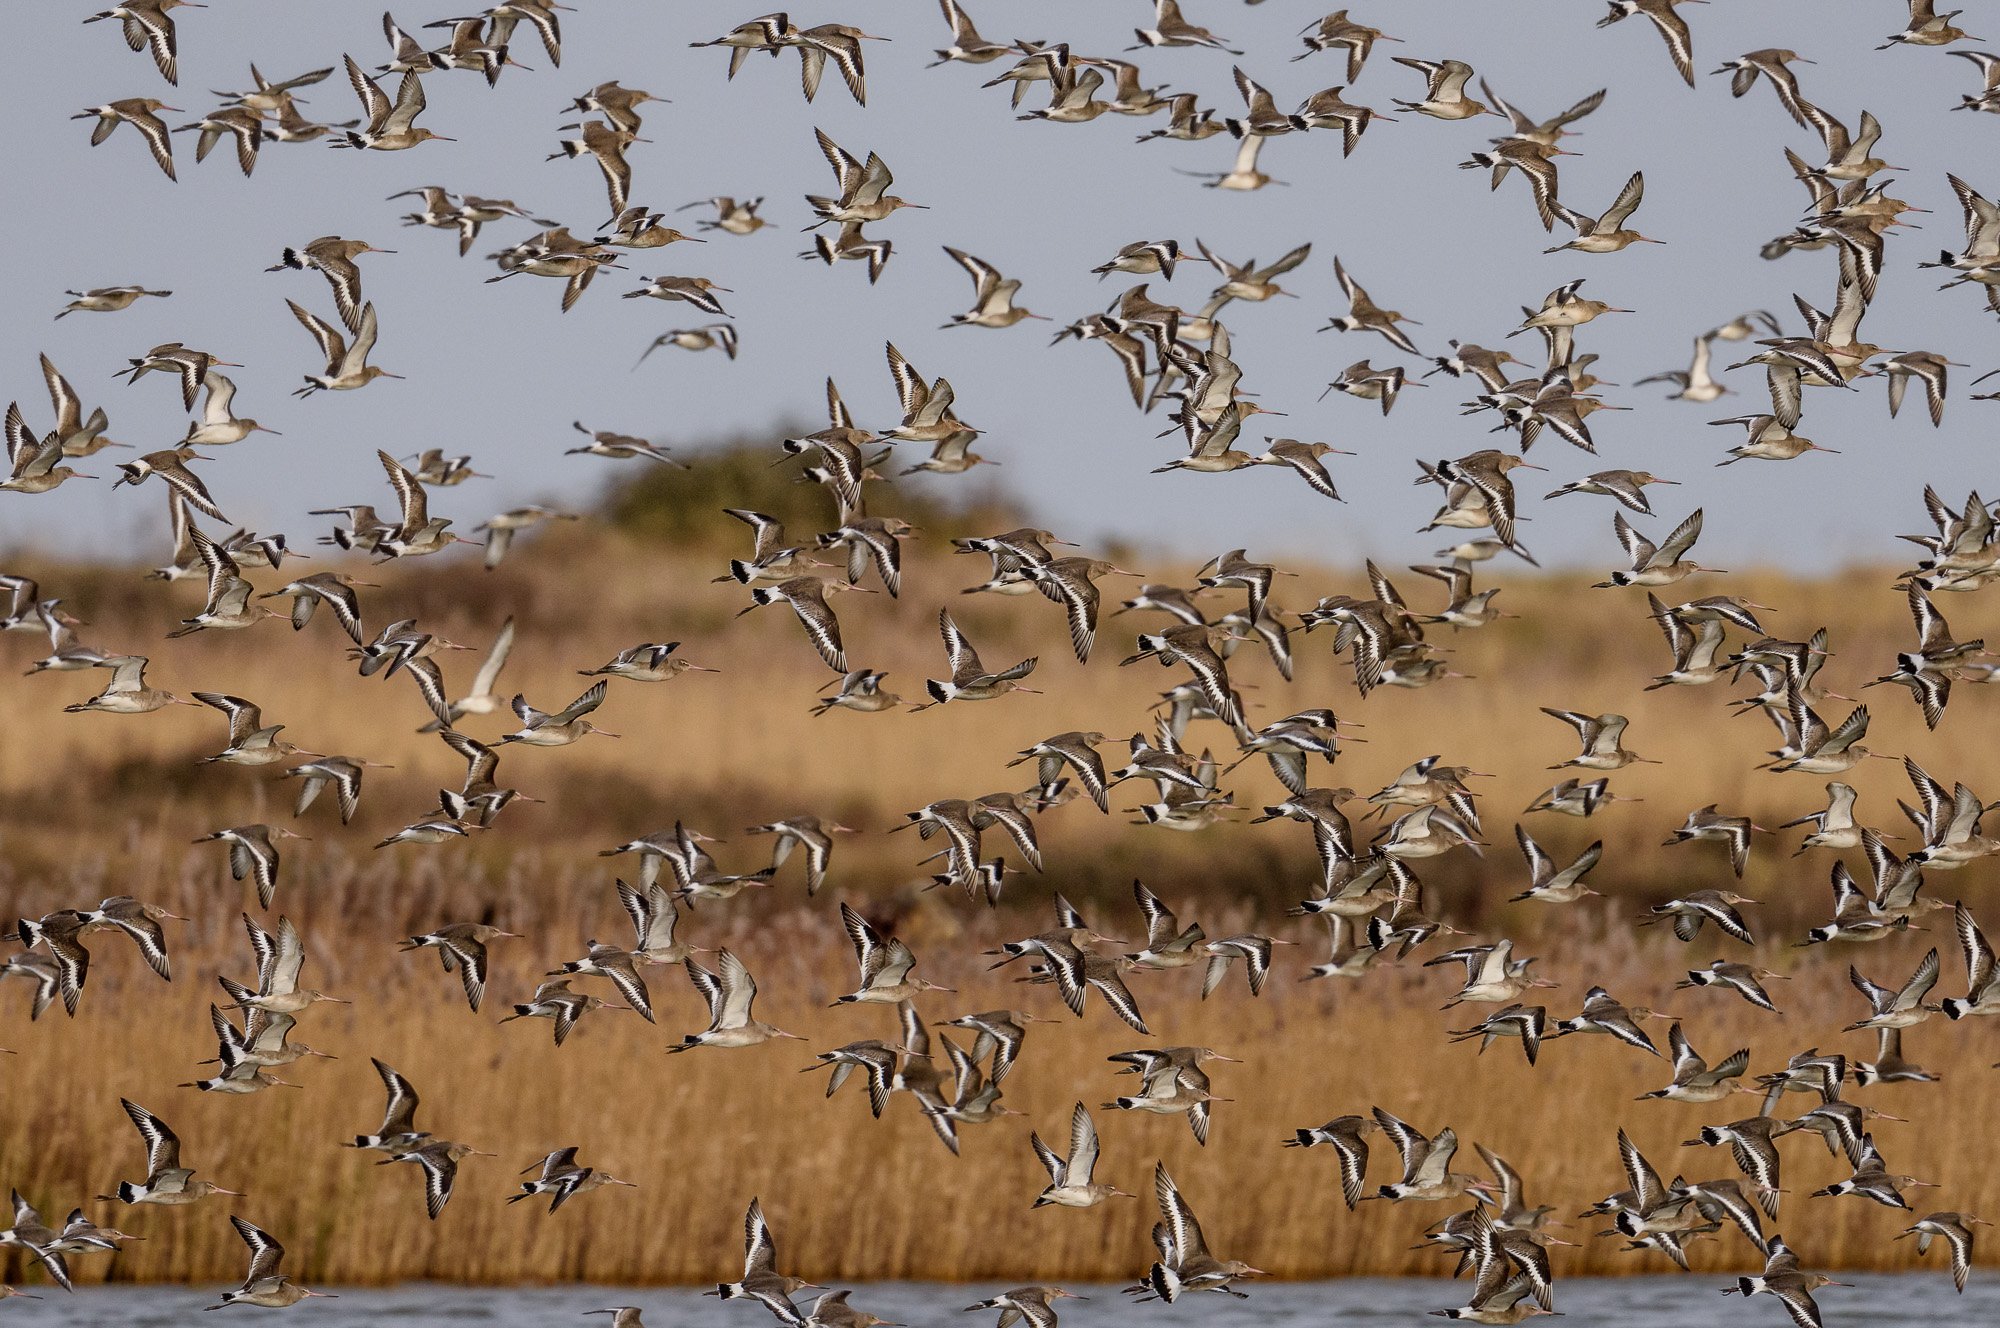 A flock of black-tailed godwits (Limosa limosa) fly over a lake with reeds in the background